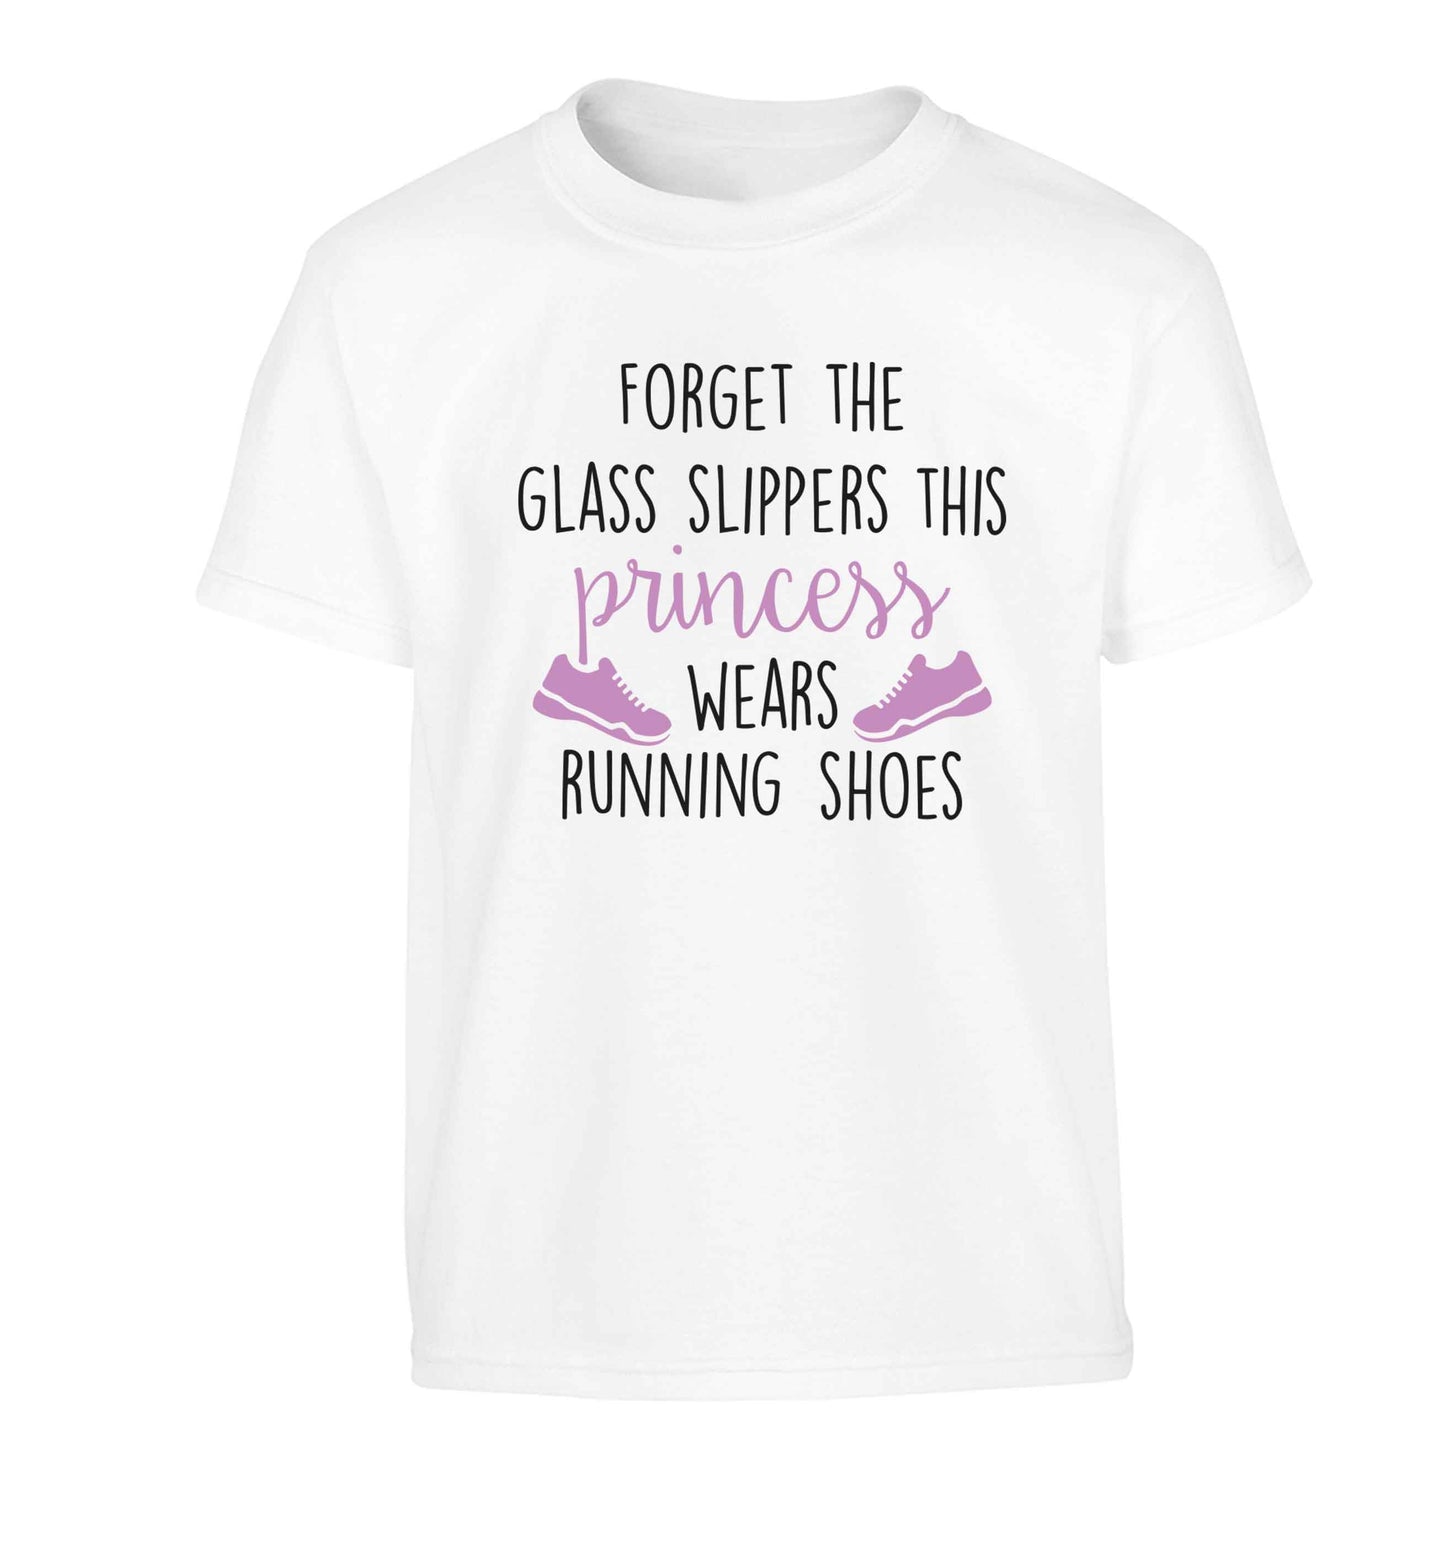 Forget the glass slippers this princess wears running shoes Children's white Tshirt 12-13 Years